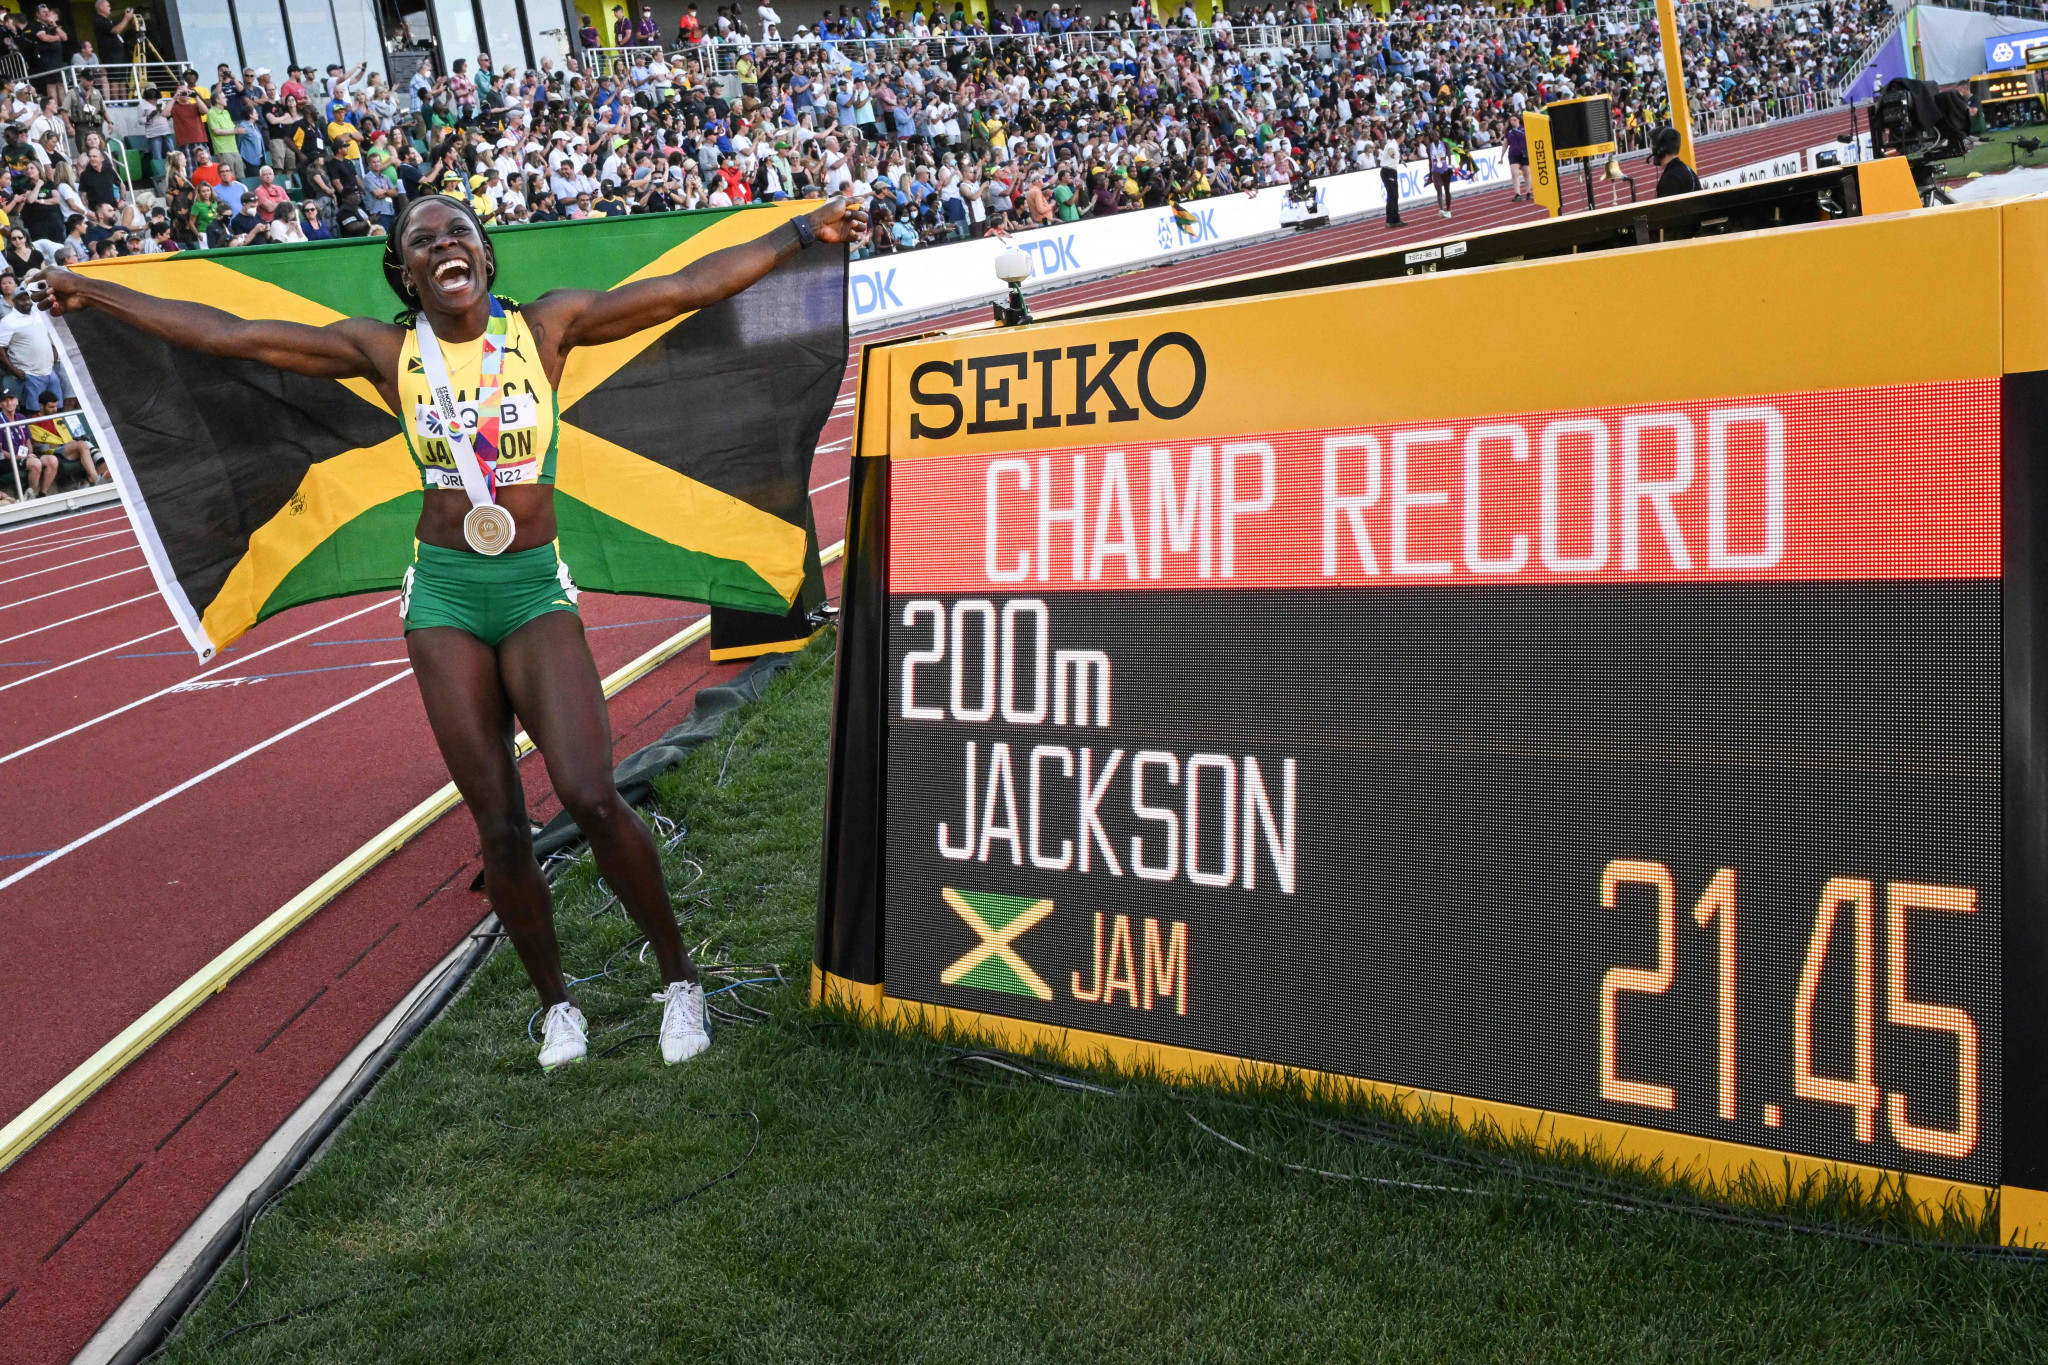 Jamaica's Shericka Jackson won her first global gold medal in the women's 200m with a championship record of 21.45 seconds ©Getty Images